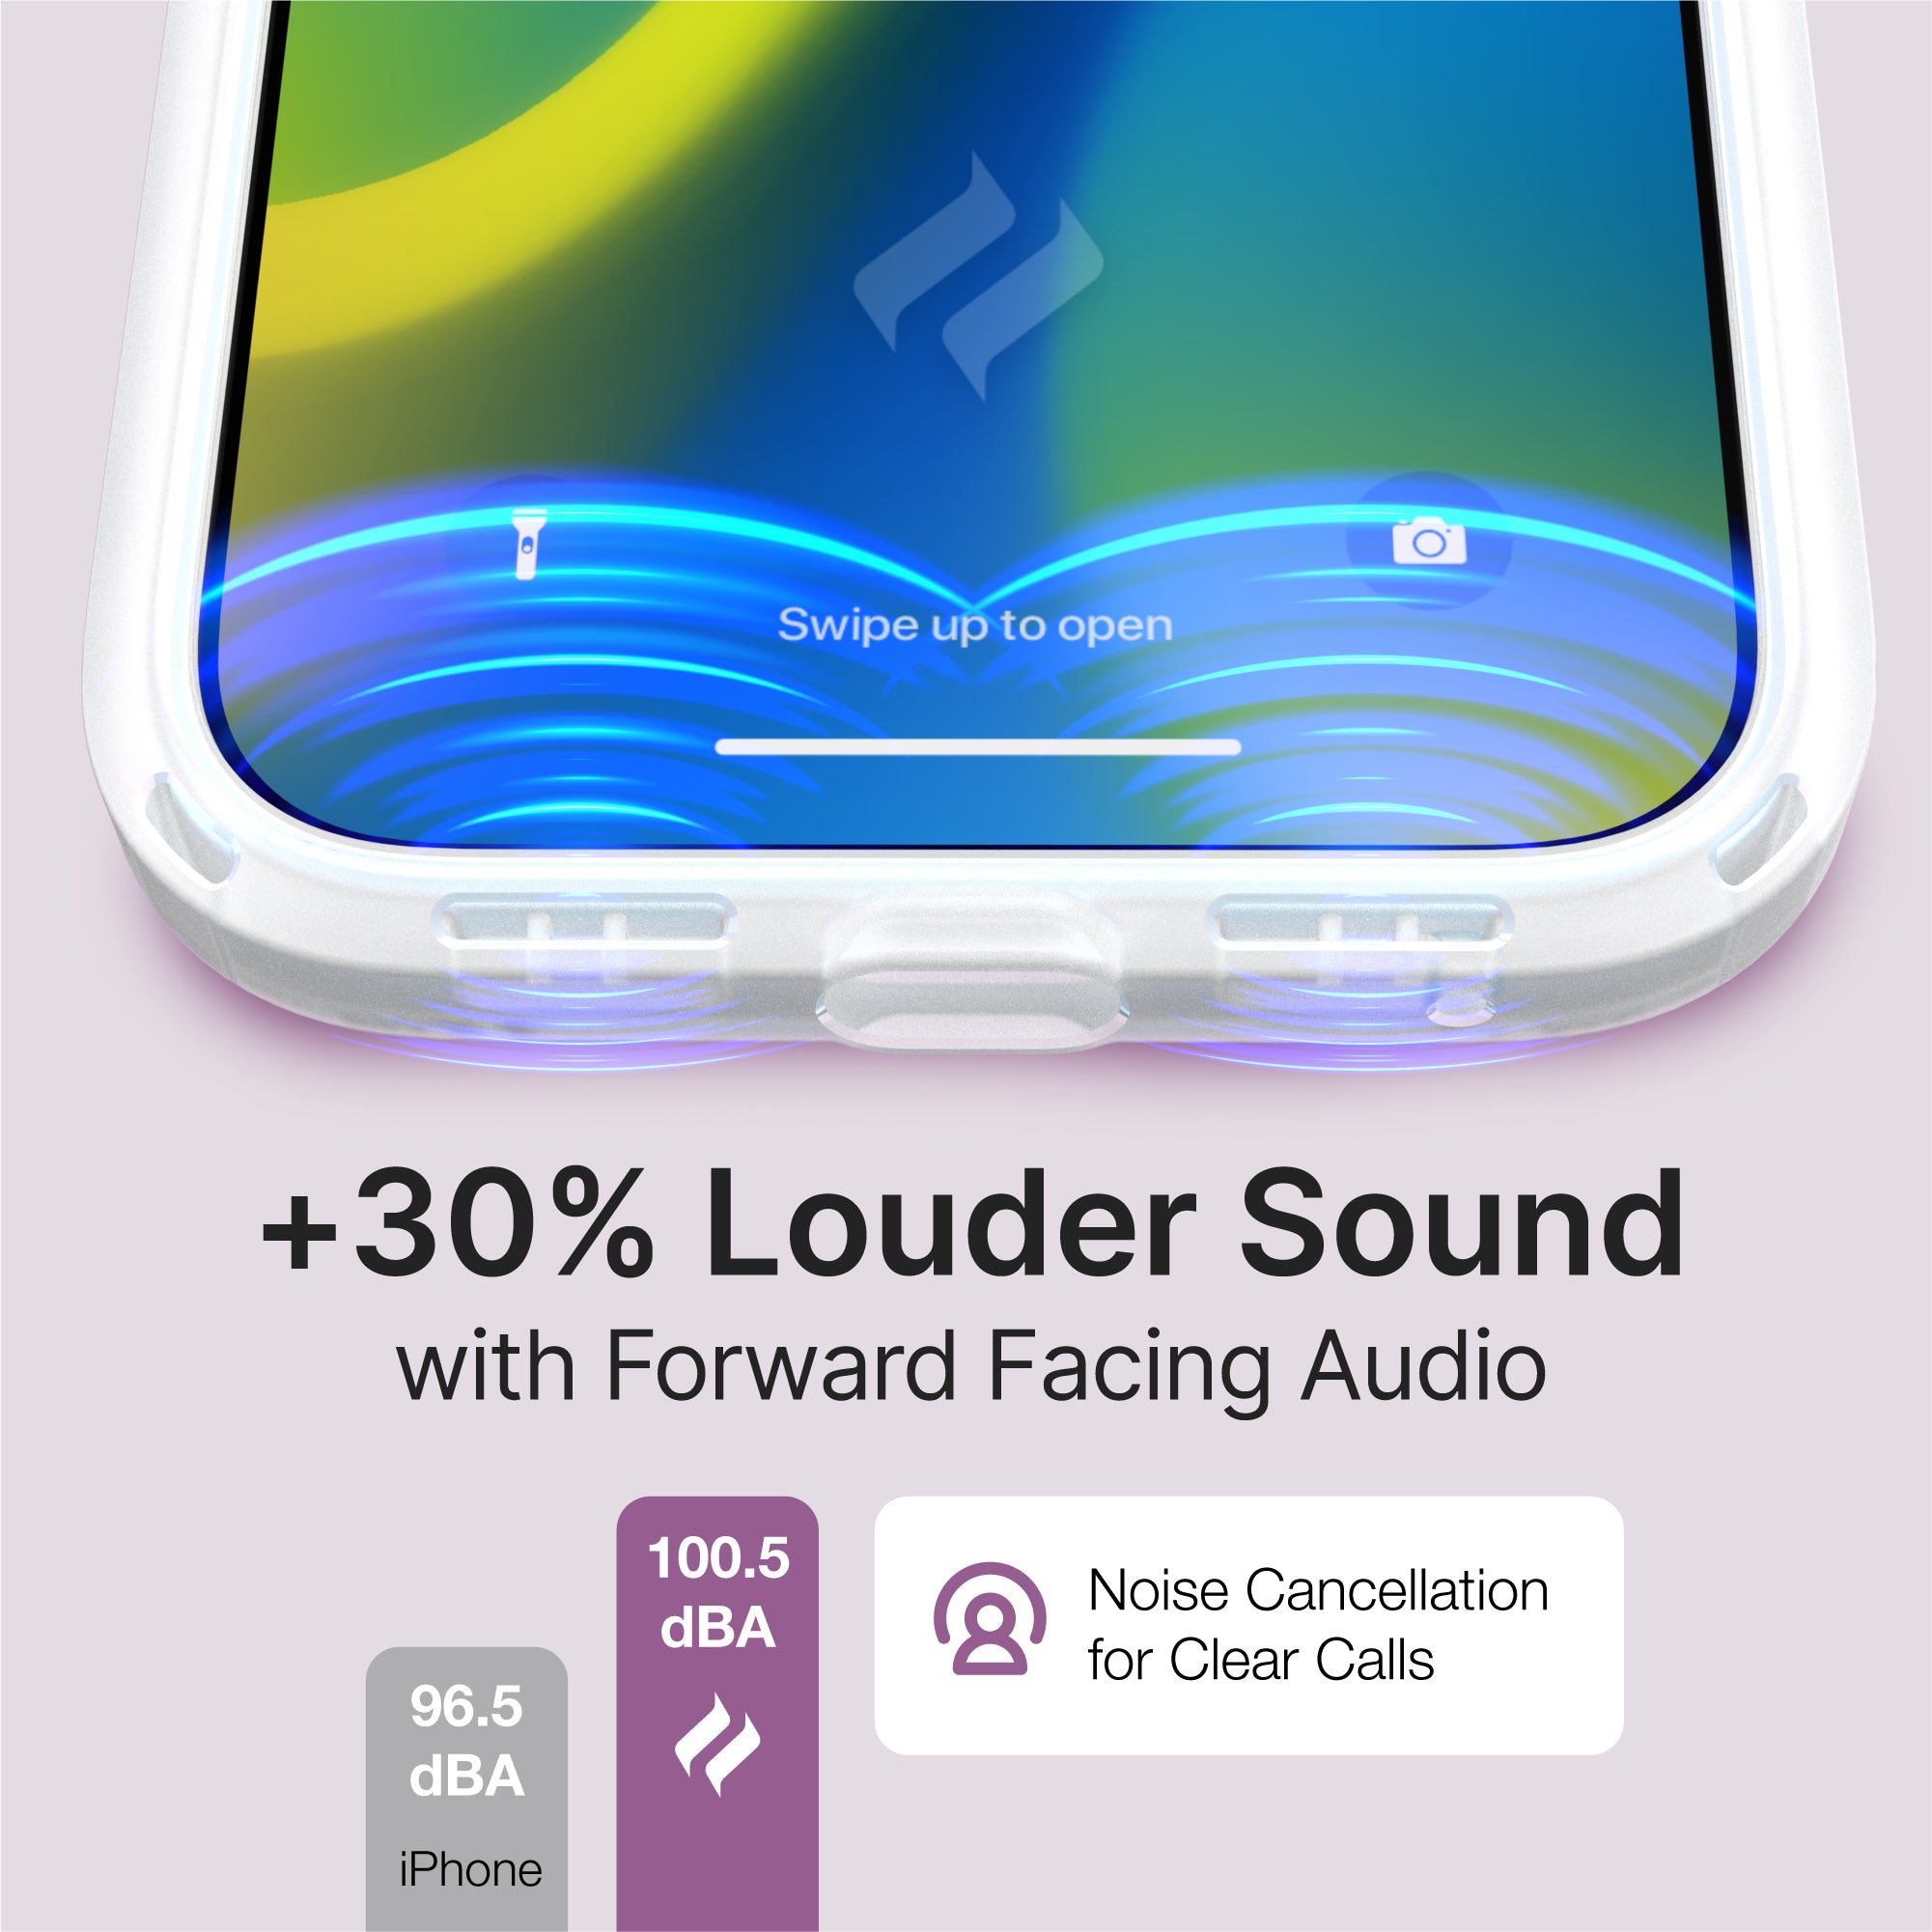  Catalyst iphone 15 series influence case iphone 15 plus in clear colorway showing the forward facing audio of the case text reads +30% louder sound with forward facing audio 96.5 dBA iphone 100.5 dBA noise cancellation for clear calls